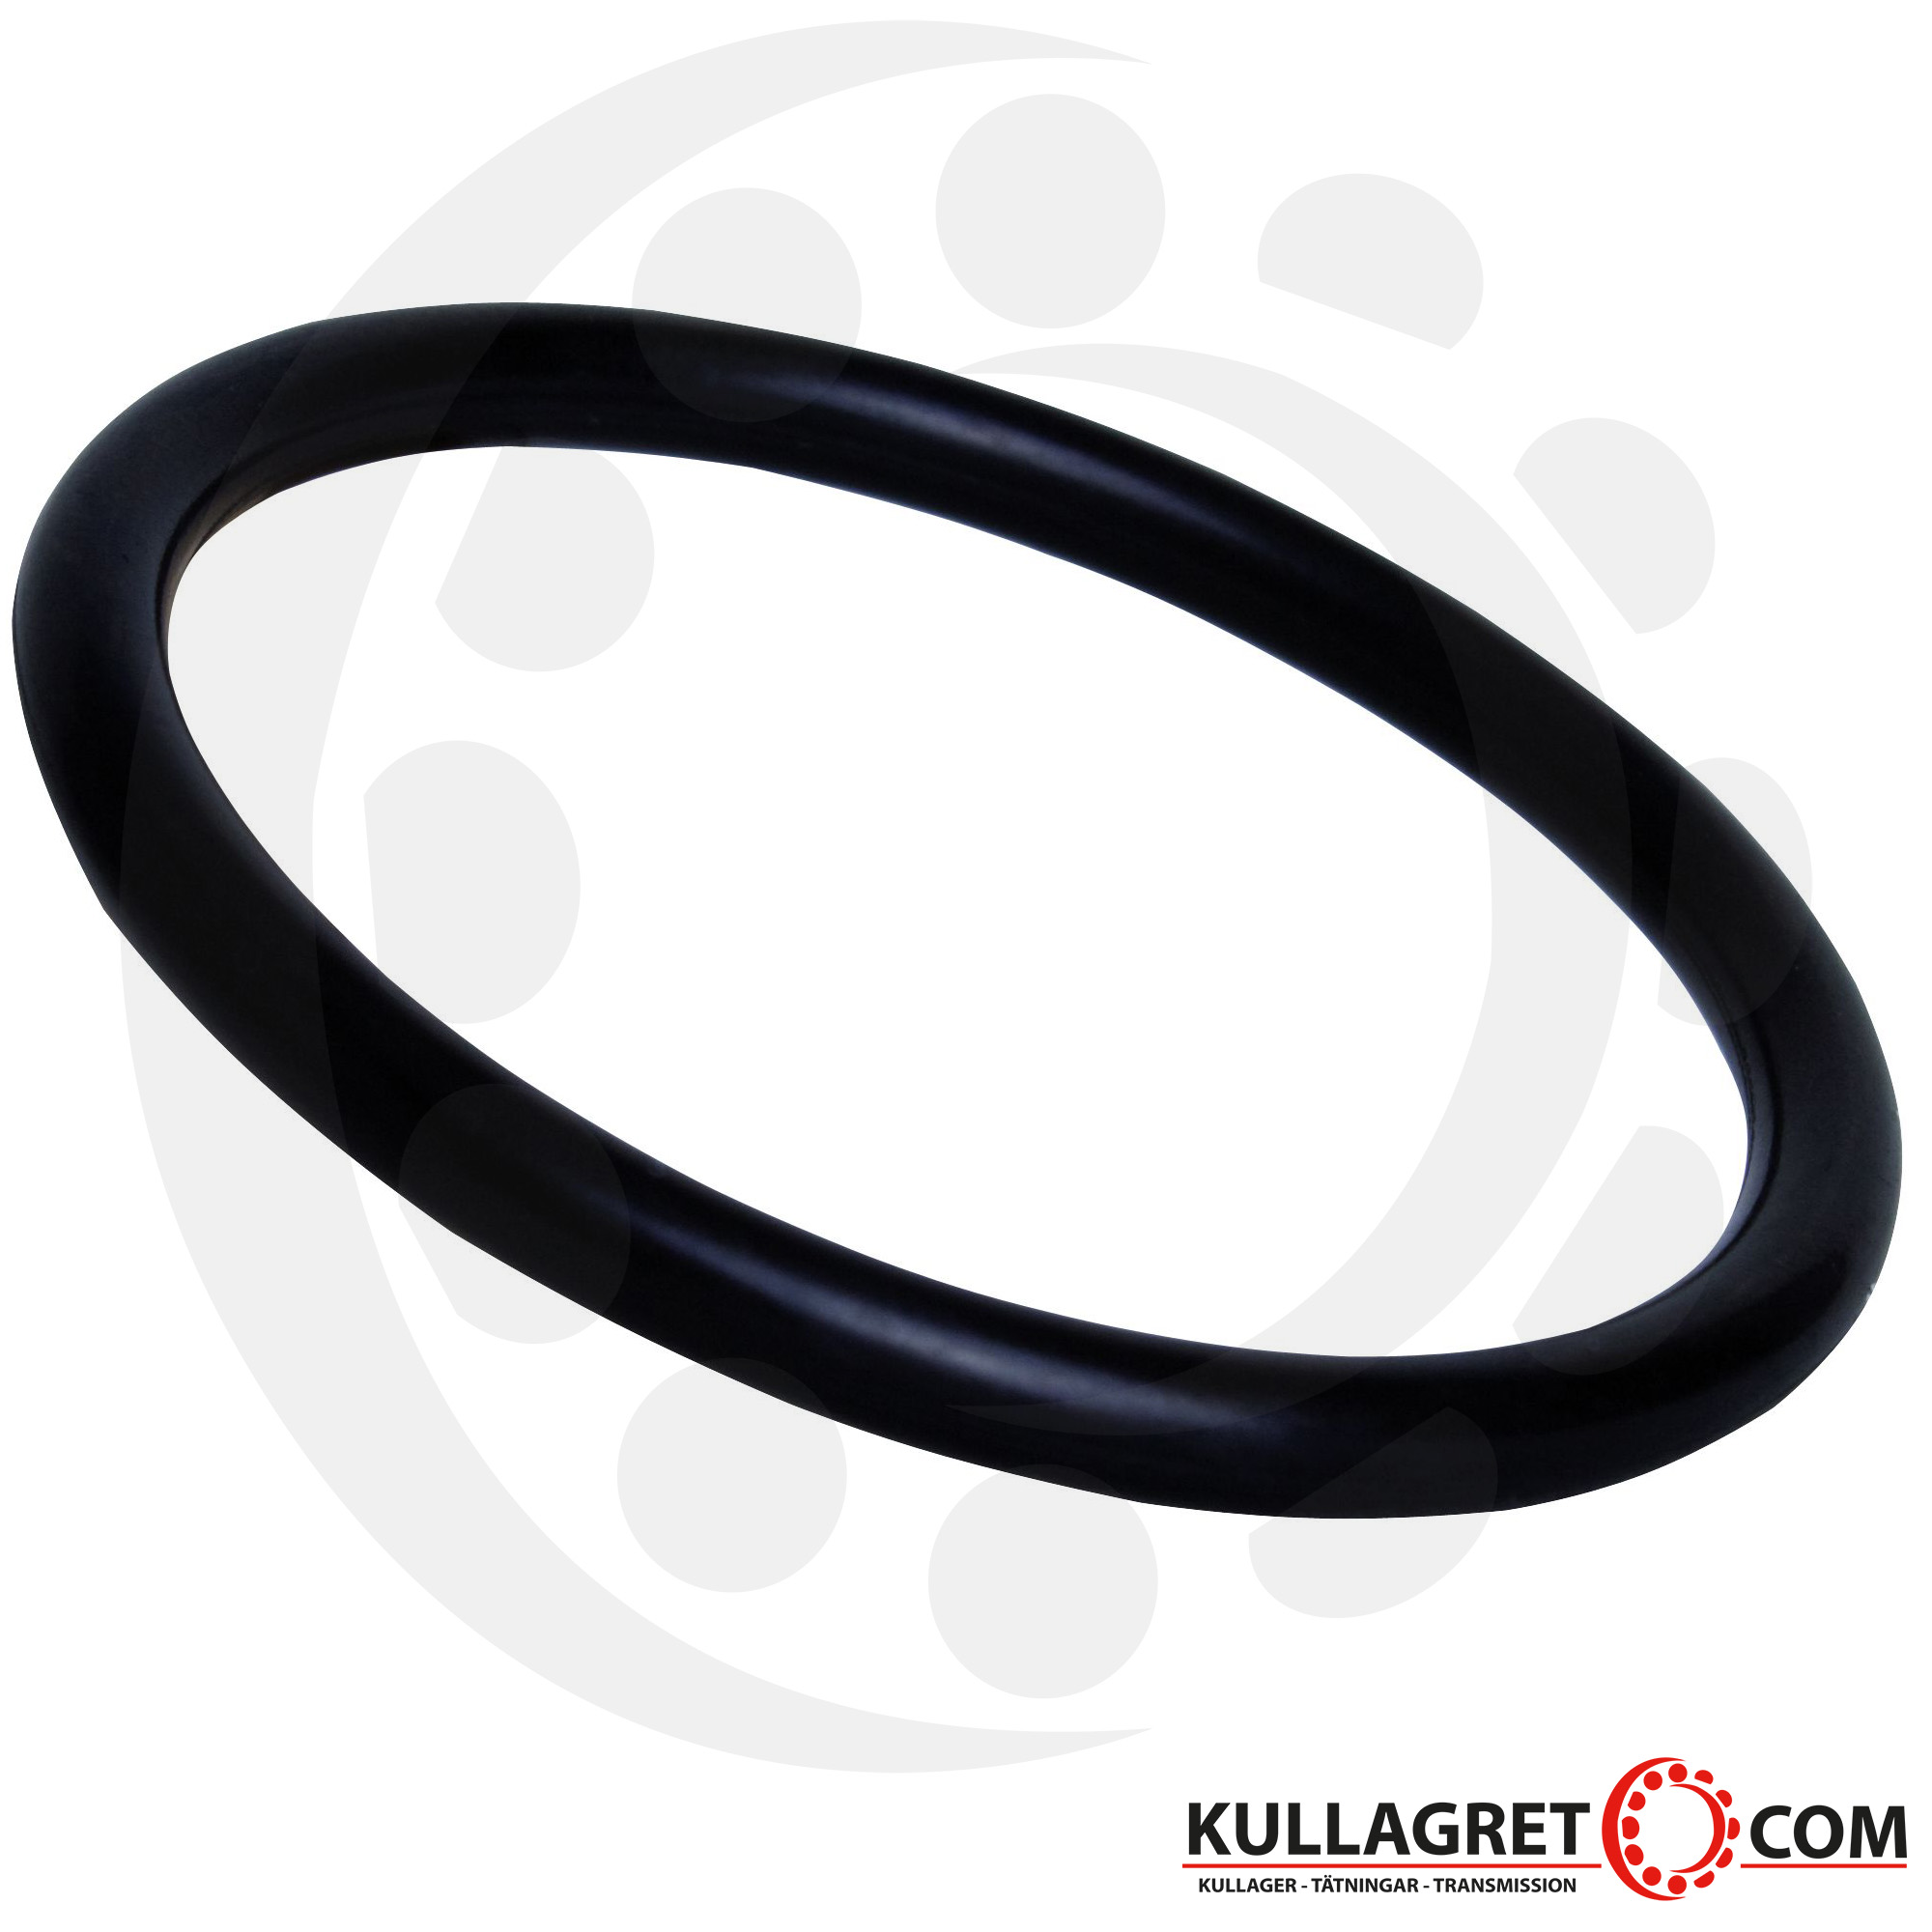 3 St. O-Ring Nullring Rundring 50,0 x 5,0 mm EPDM 70 Shore A schwarz 